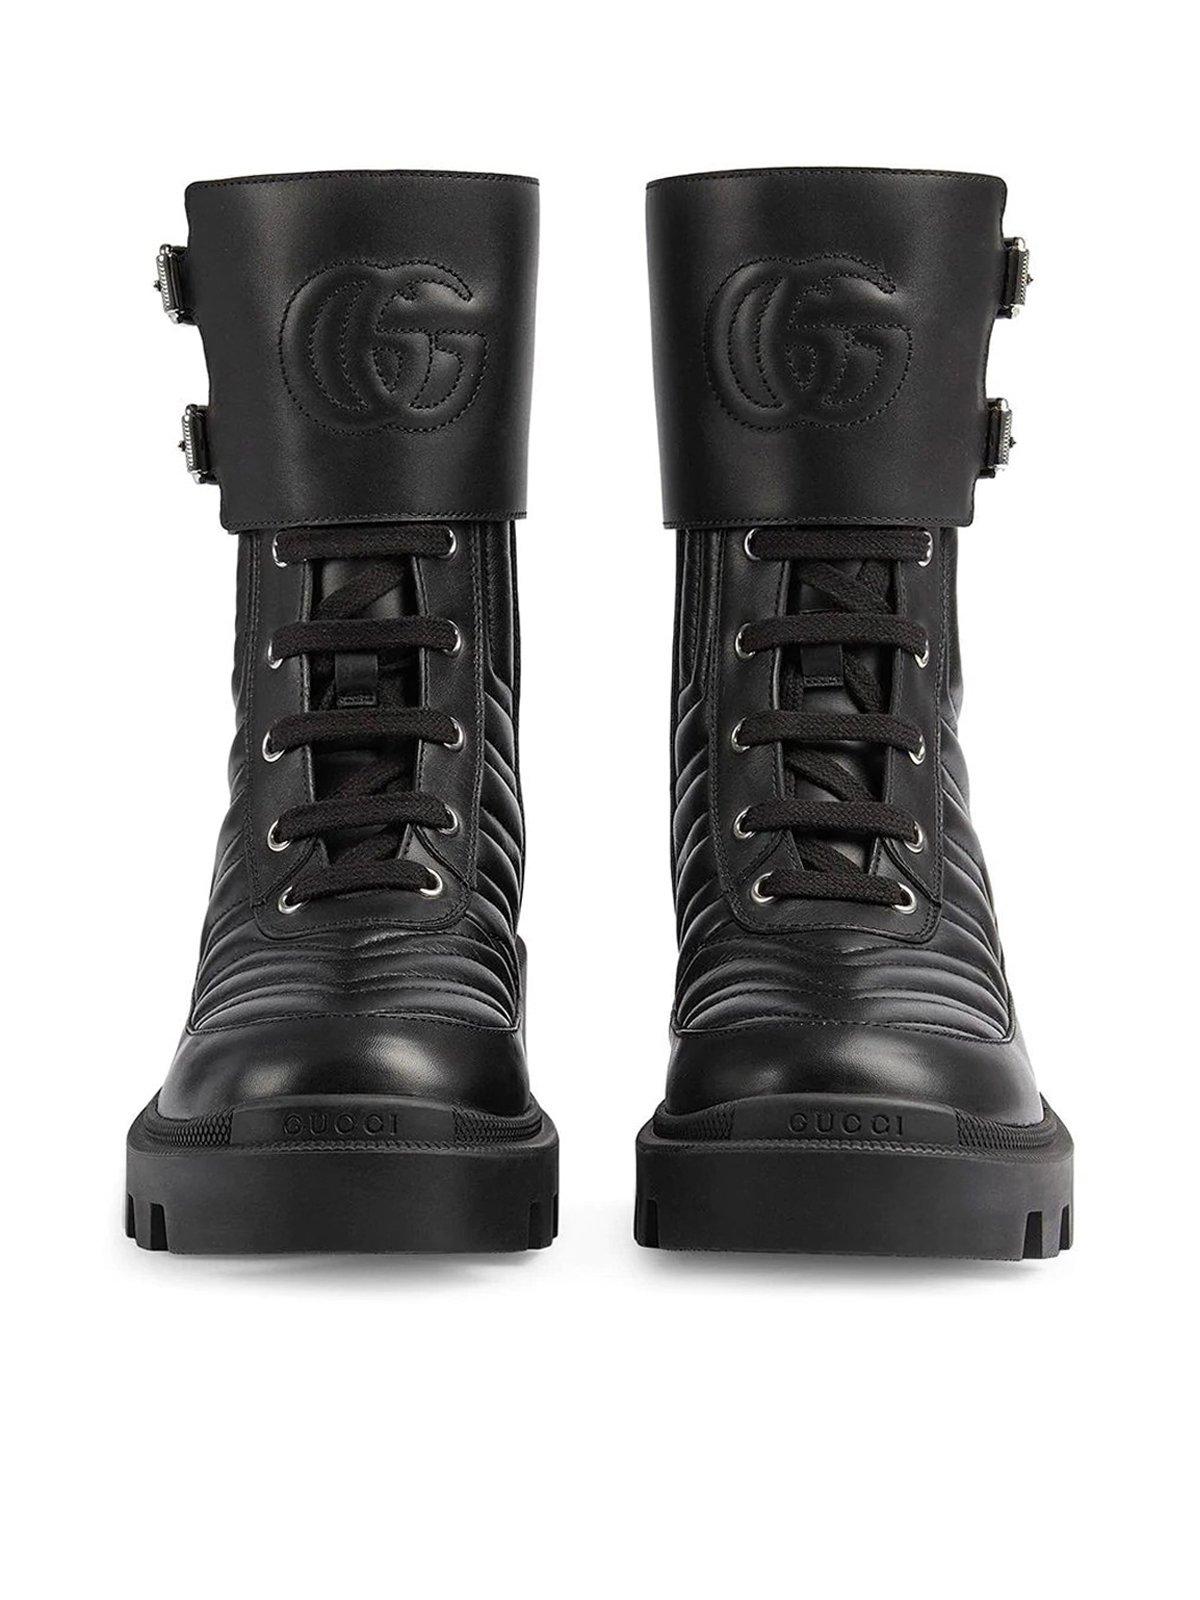 Gucci Frances Chevron-quilted Leather Heeled Biker Boots in Black | Lyst  Canada